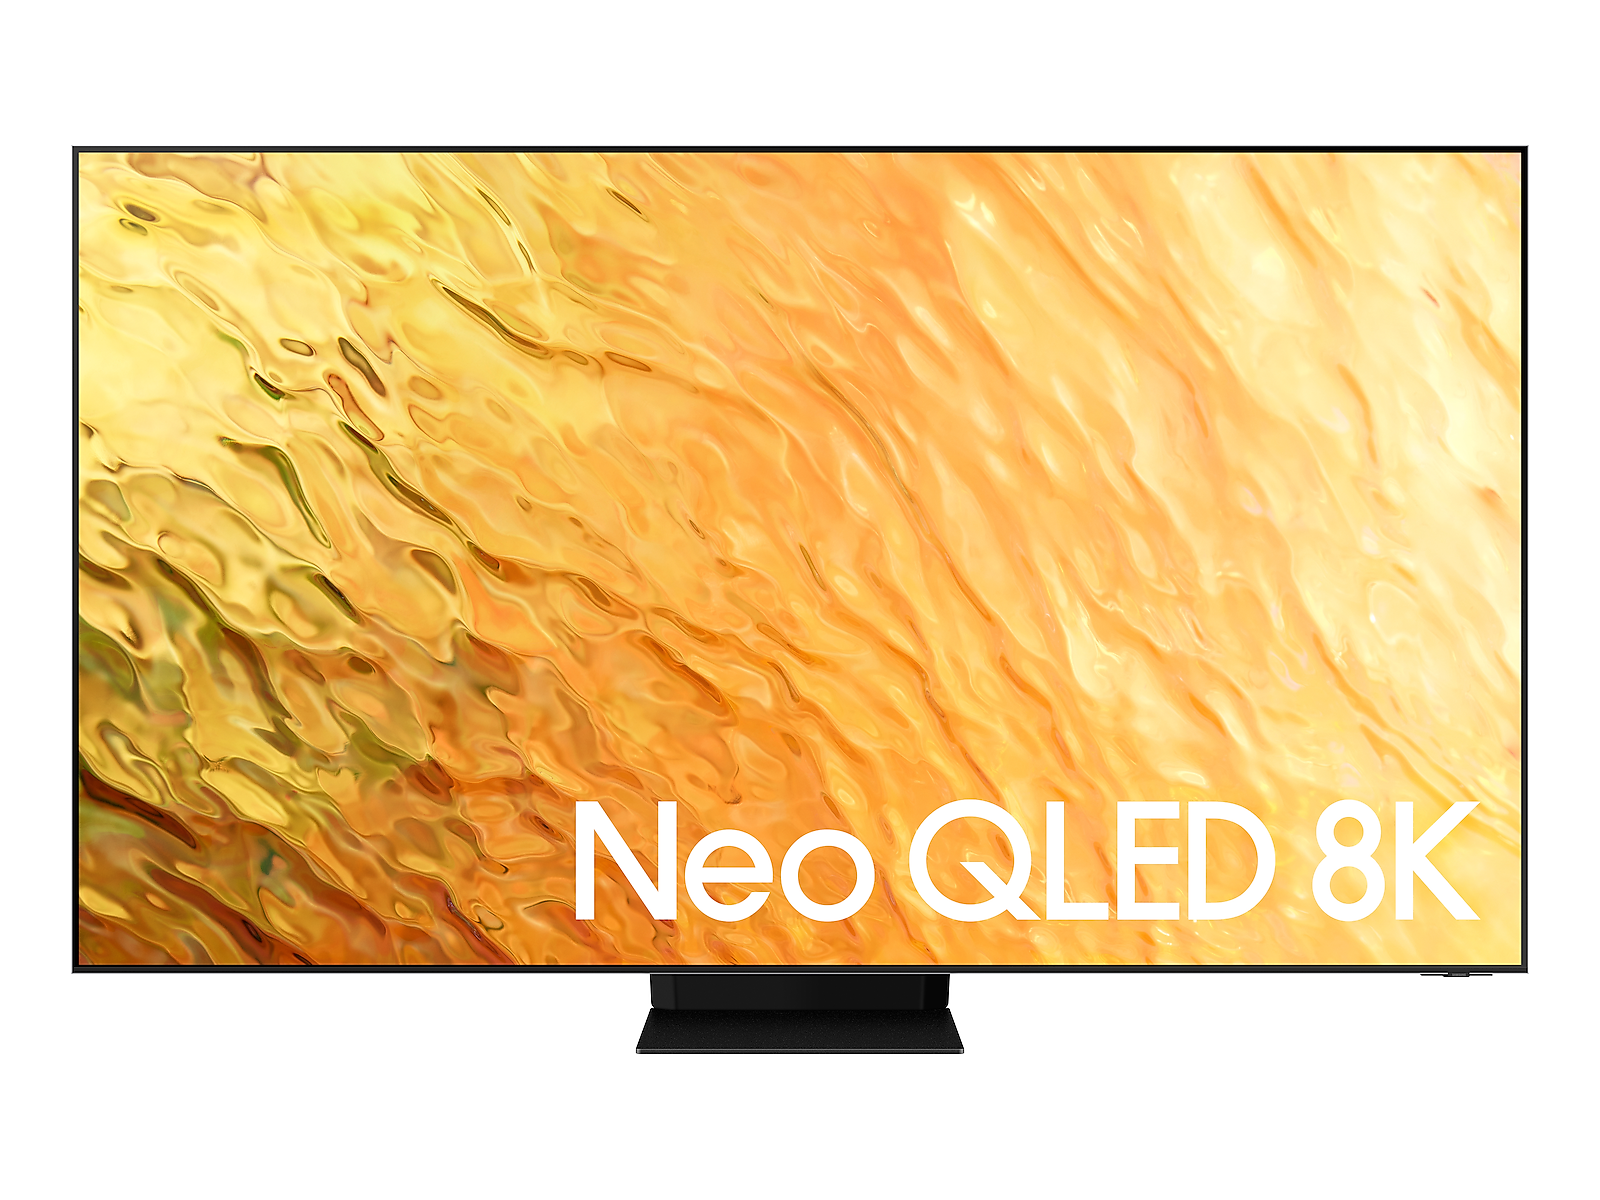 75" Class QN850B Samsung Neo QLED 8K Smart TV in stainless steel (2022)